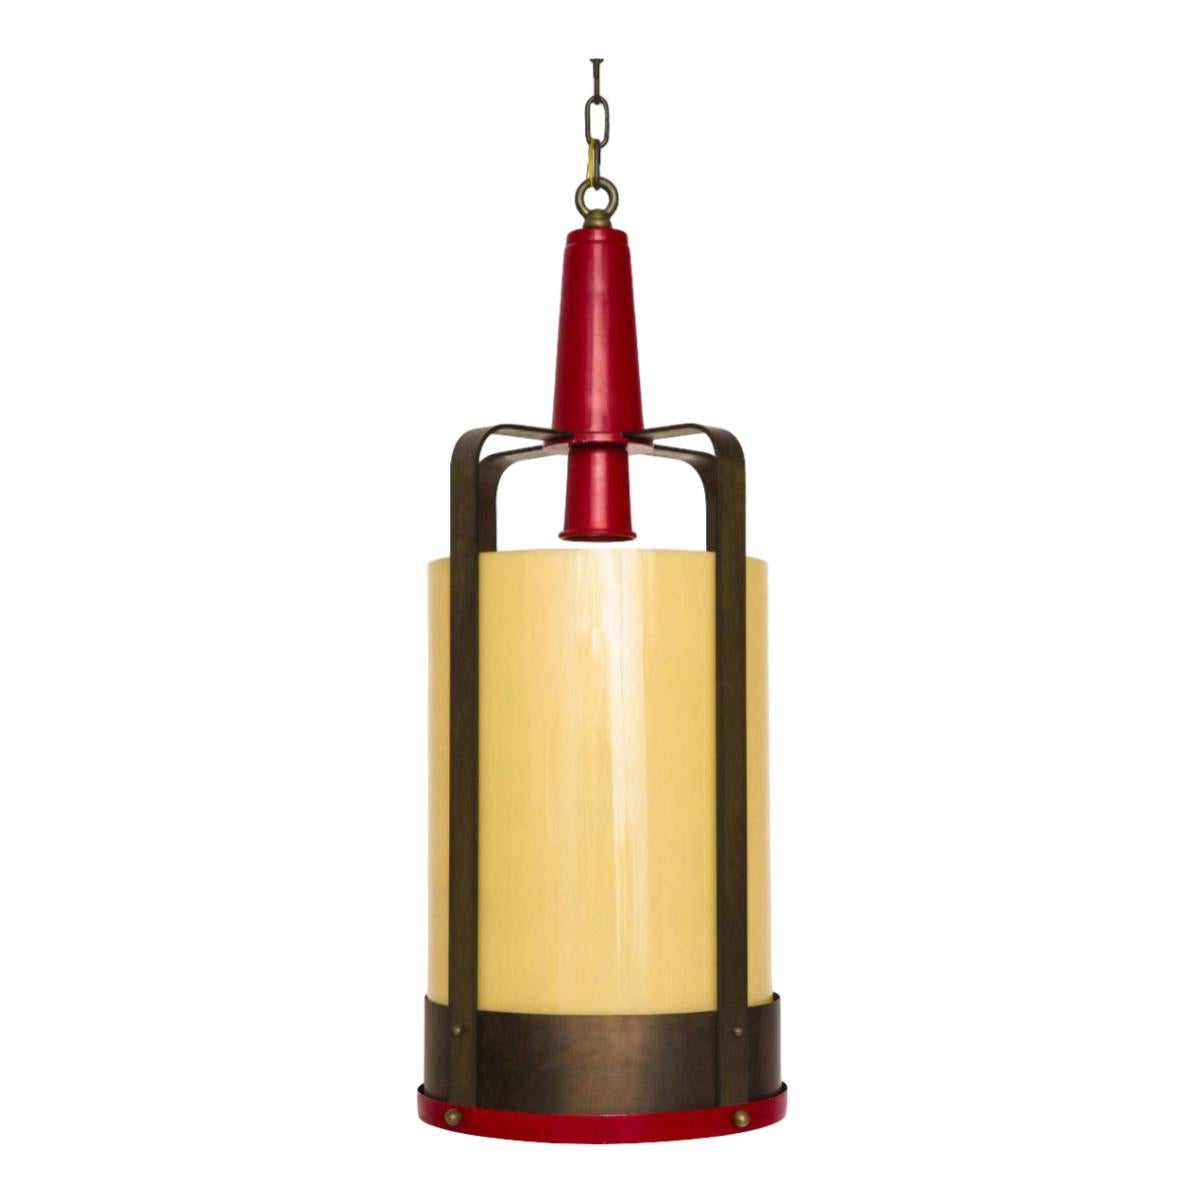 Large industrial style lantern style pendants with amber glass diffusers.